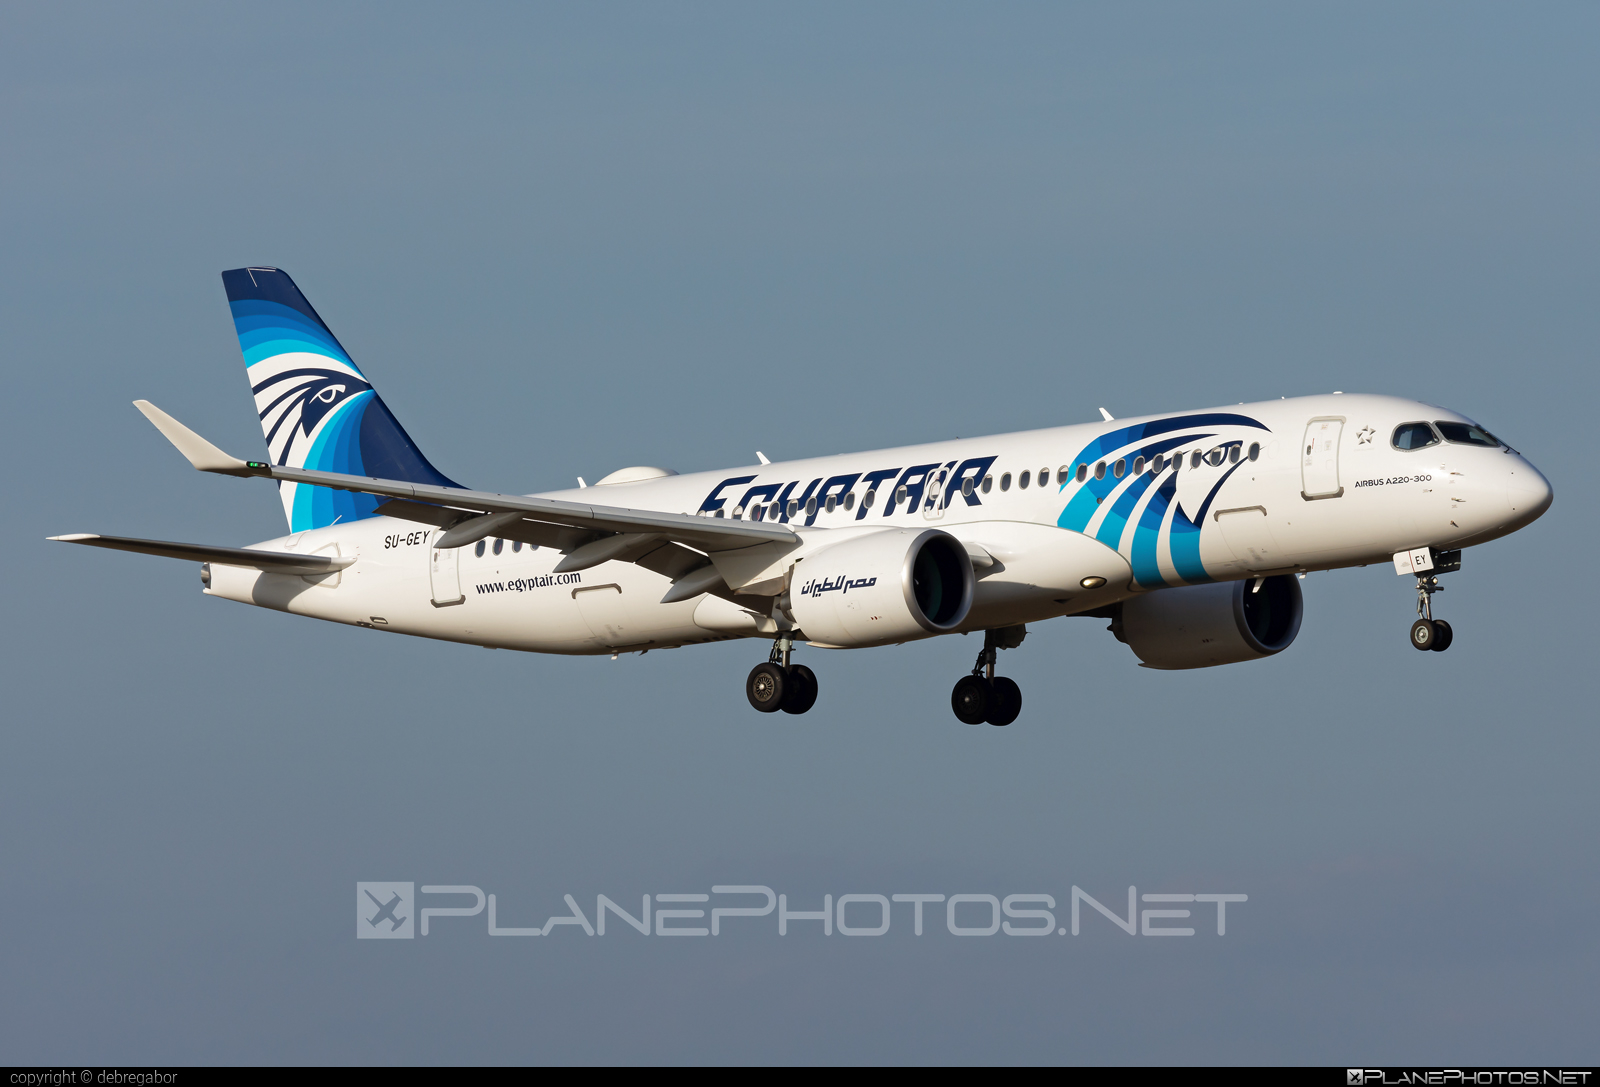 Airbus A220-300 - SU-GEY operated by EgyptAir #EgyptAir #a220300 #a220family #airbus #cs300 #cseries #cseries300